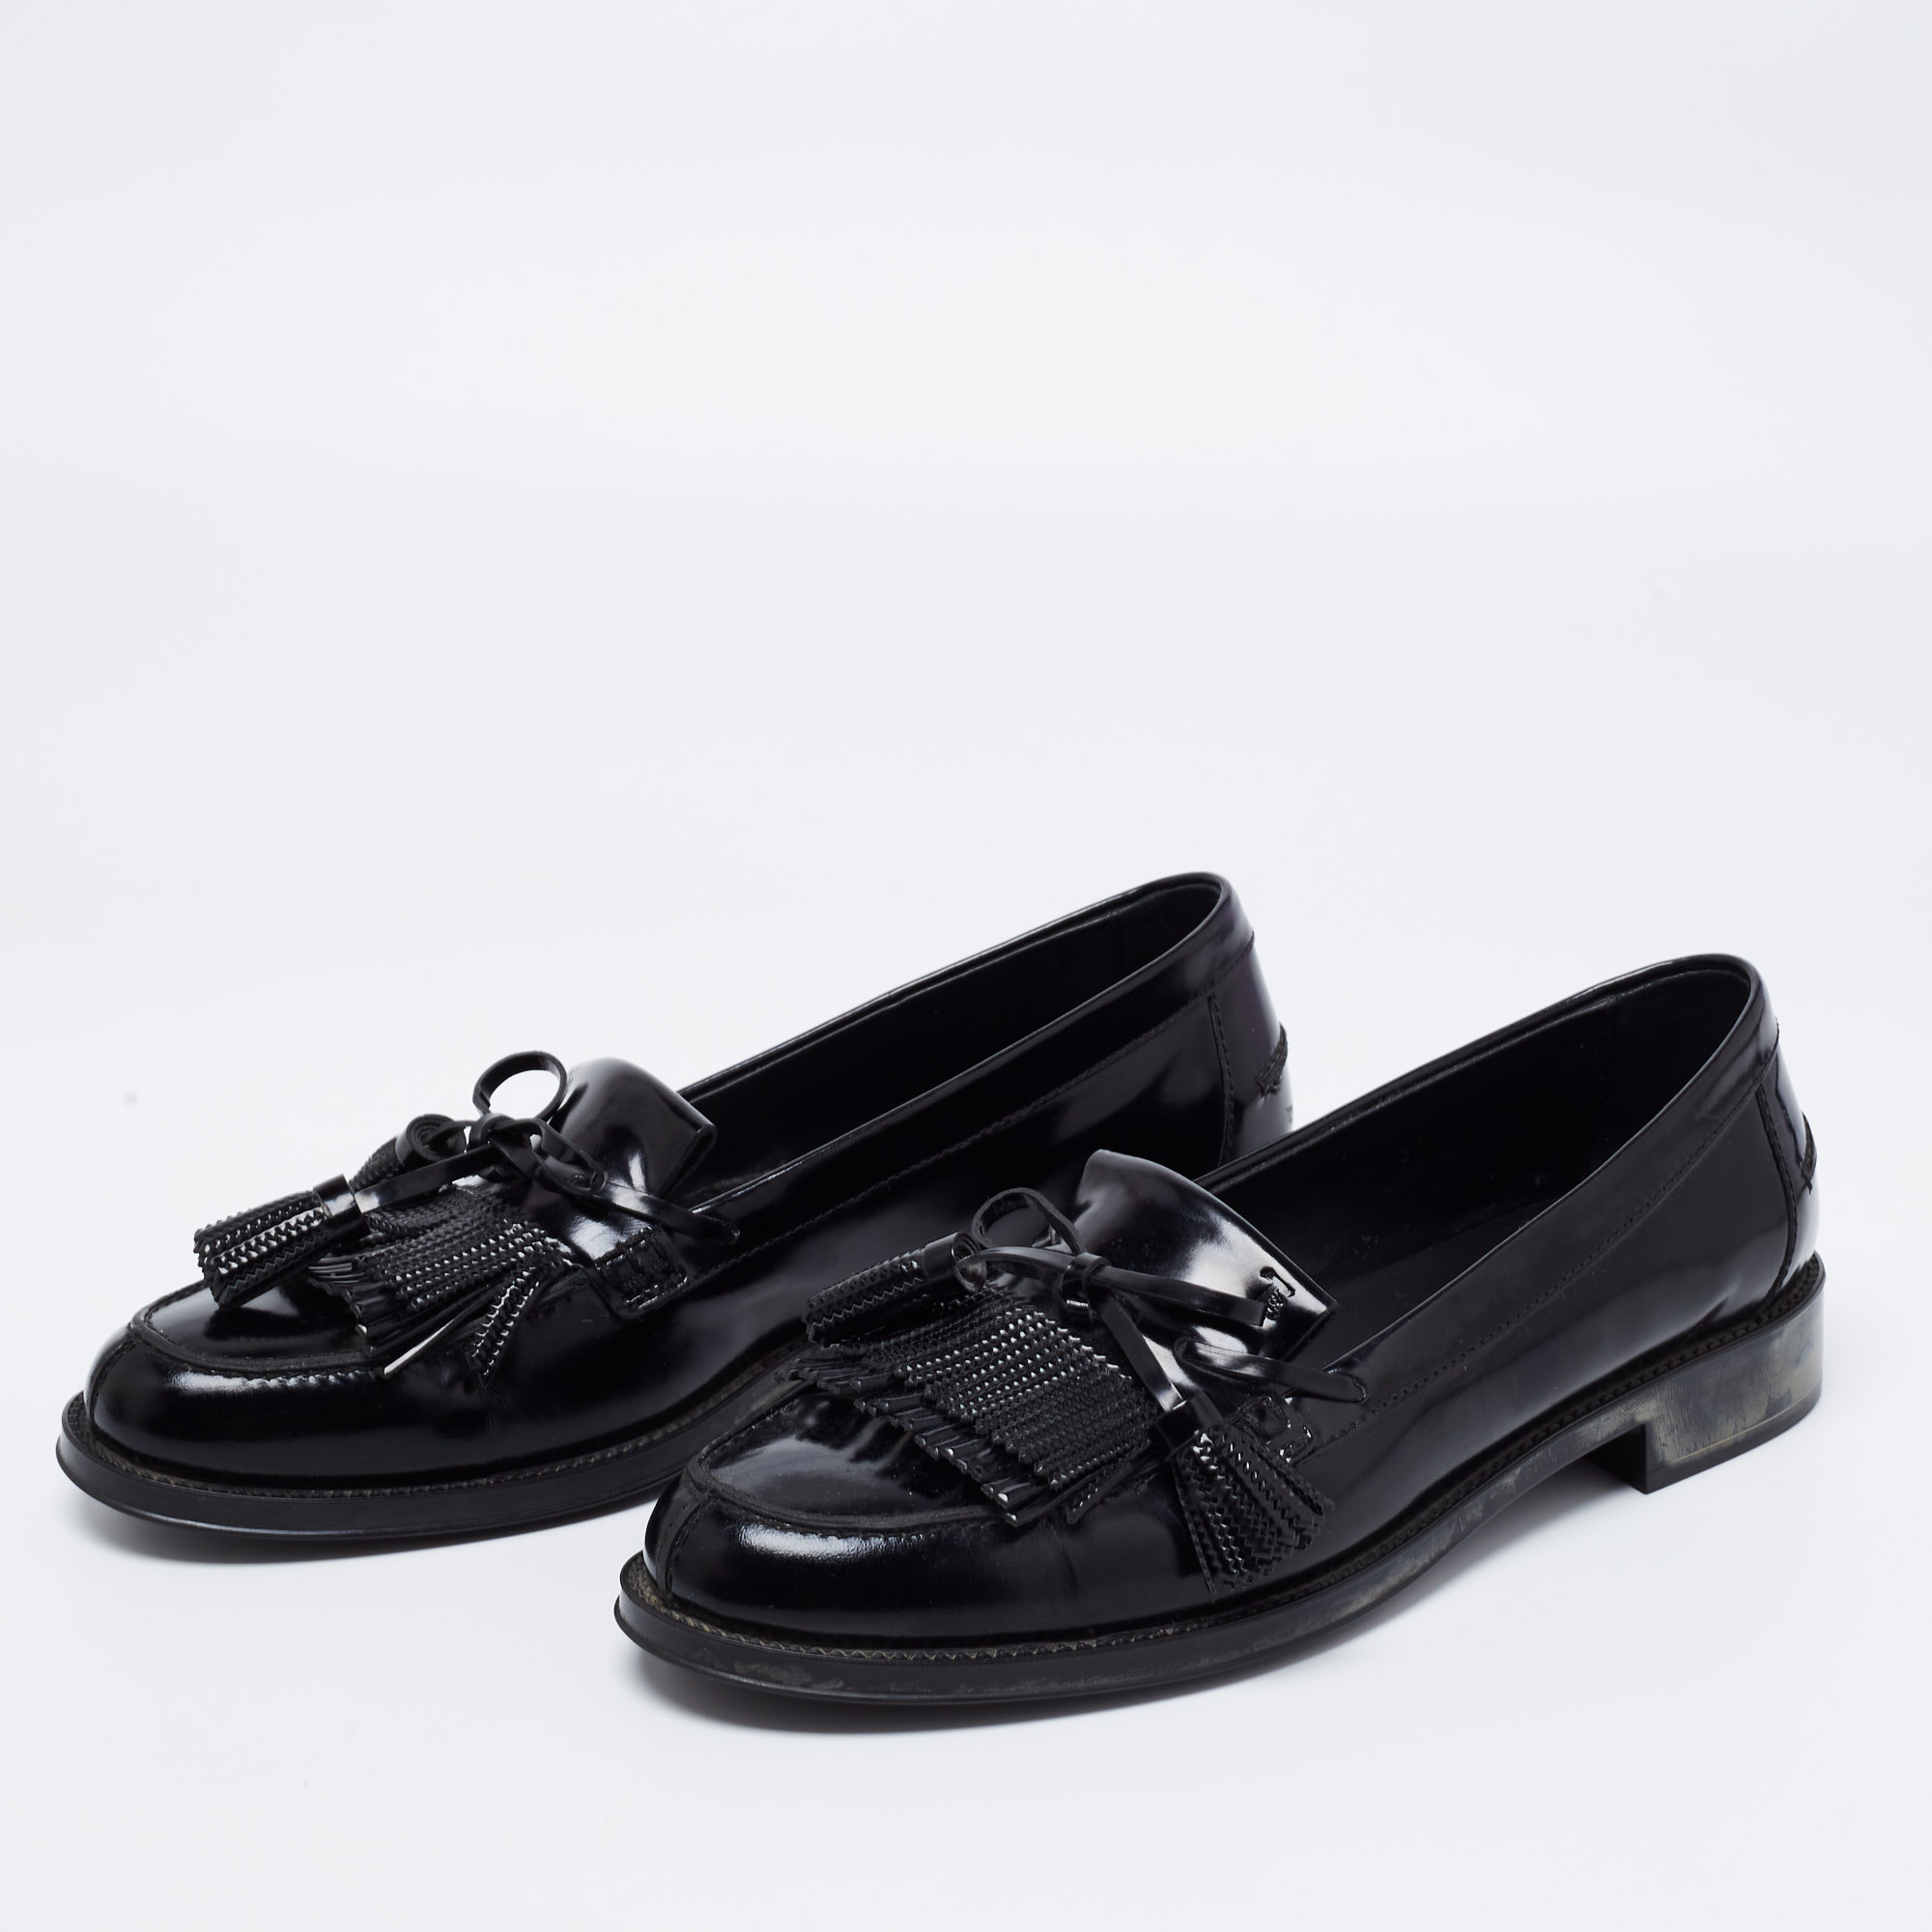 

Tod's Black Patent Leather Tassel Bow Fringe Detail Loafers Size